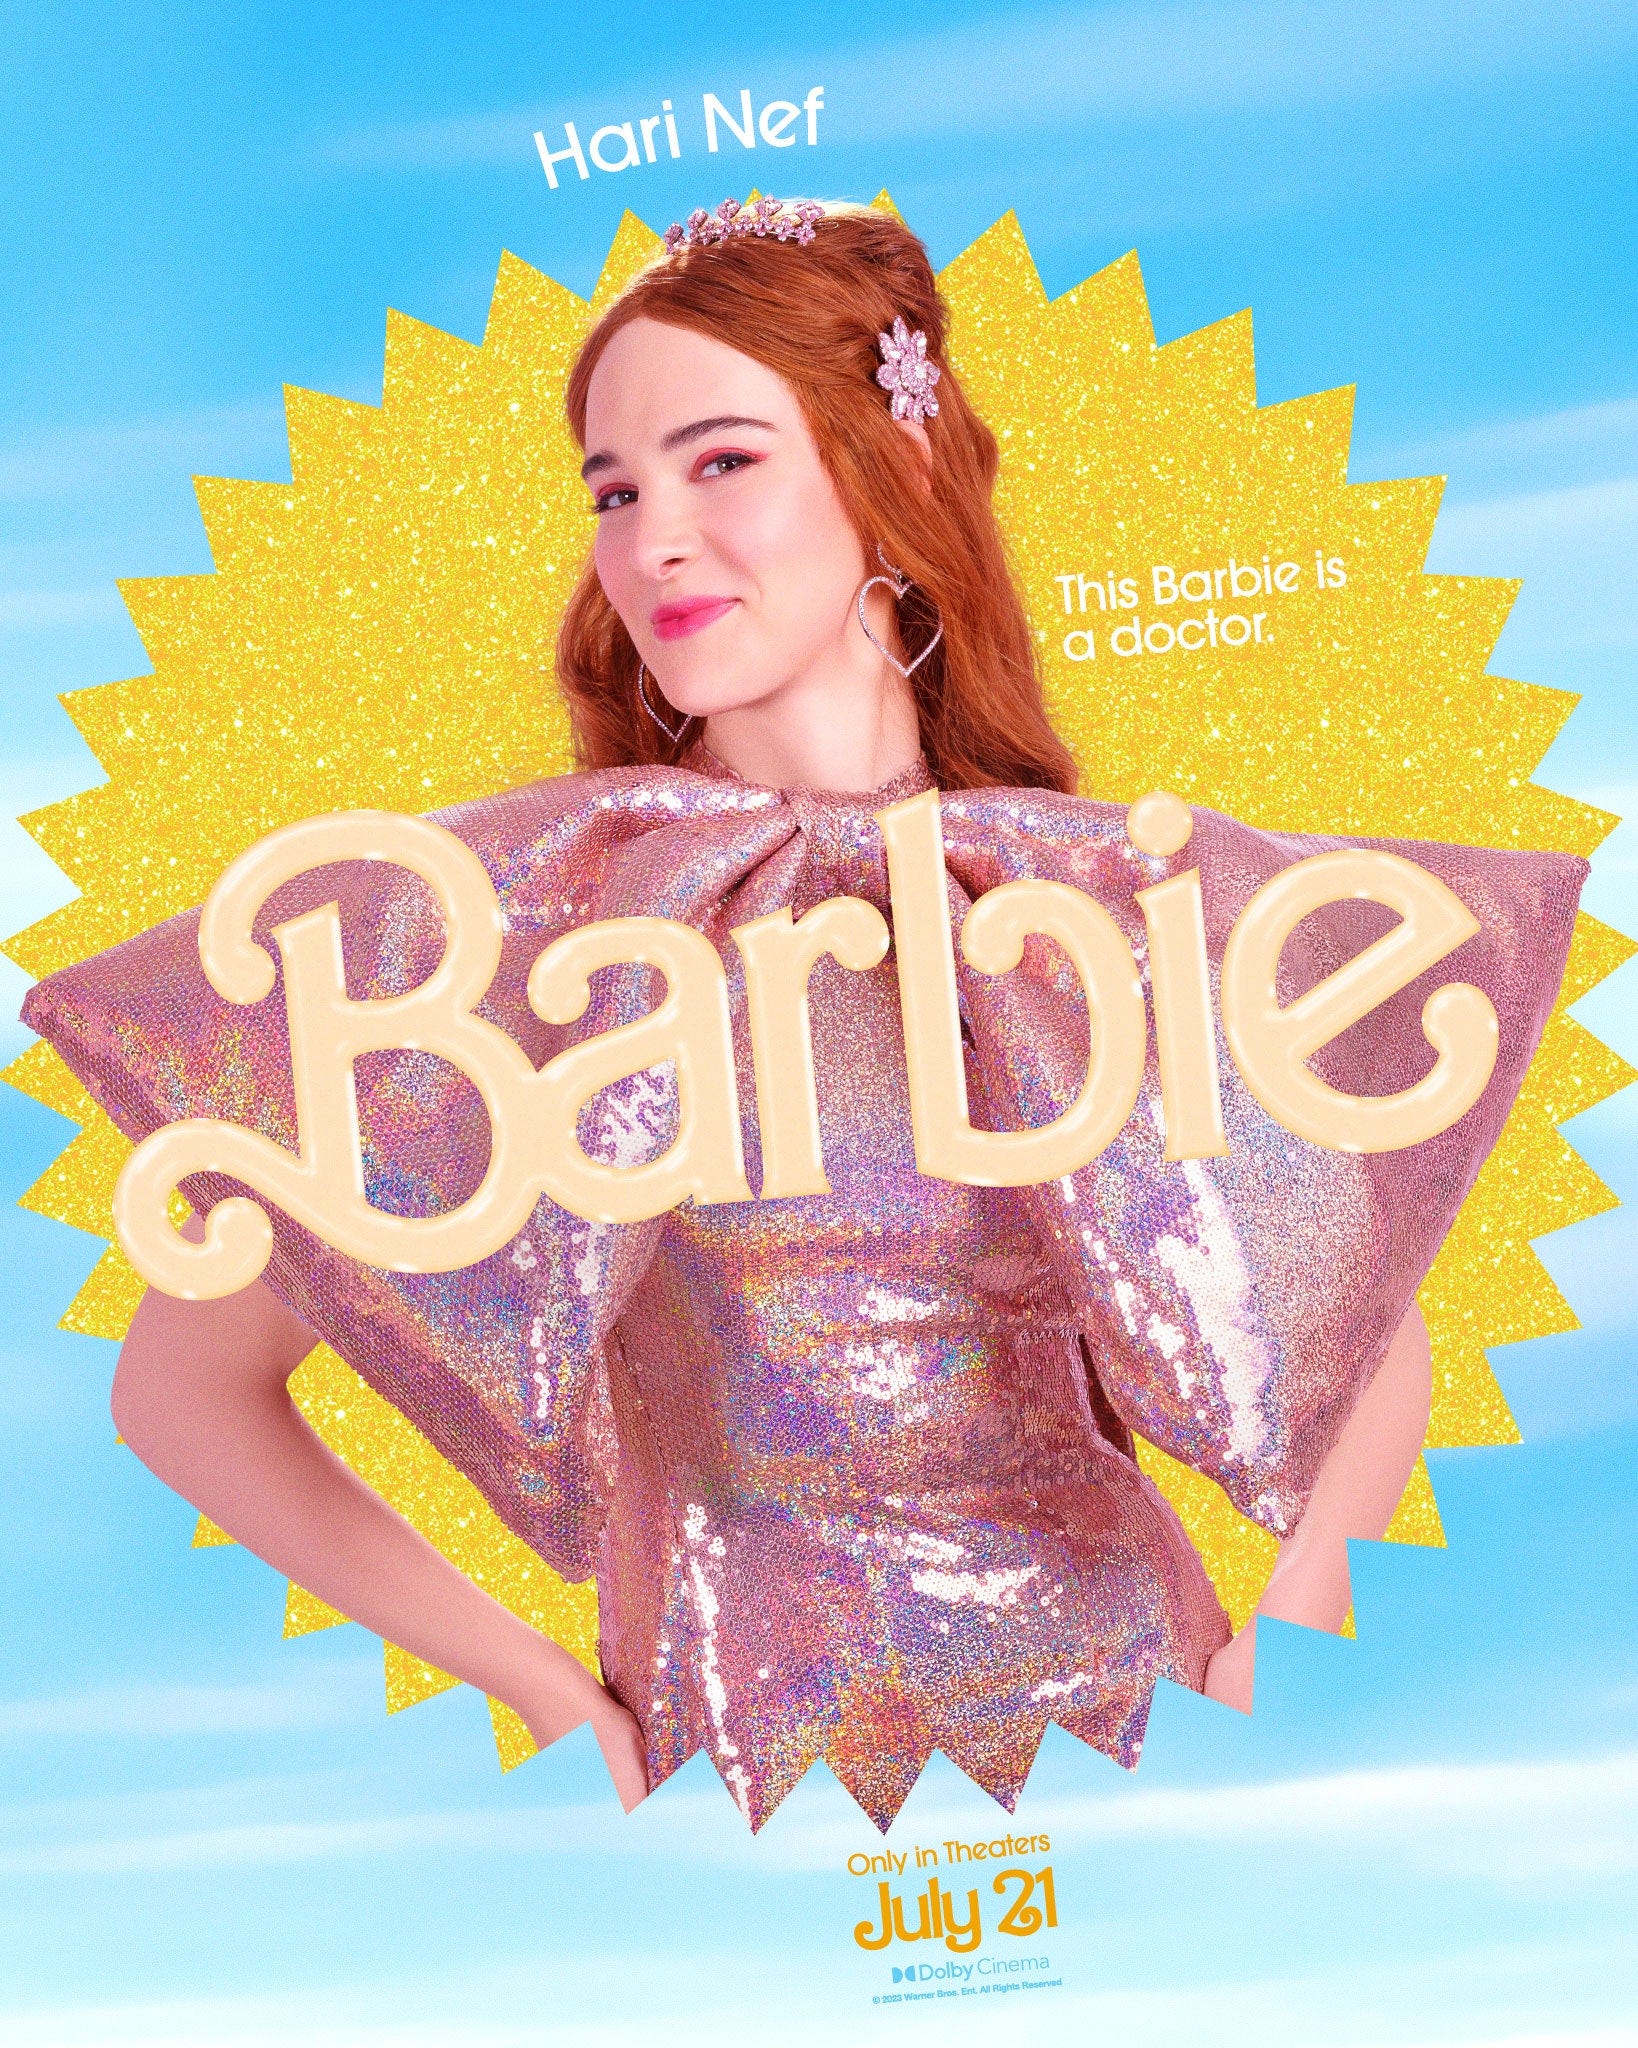 The BARBIE Reviews Are In - by Evan Ross Katz